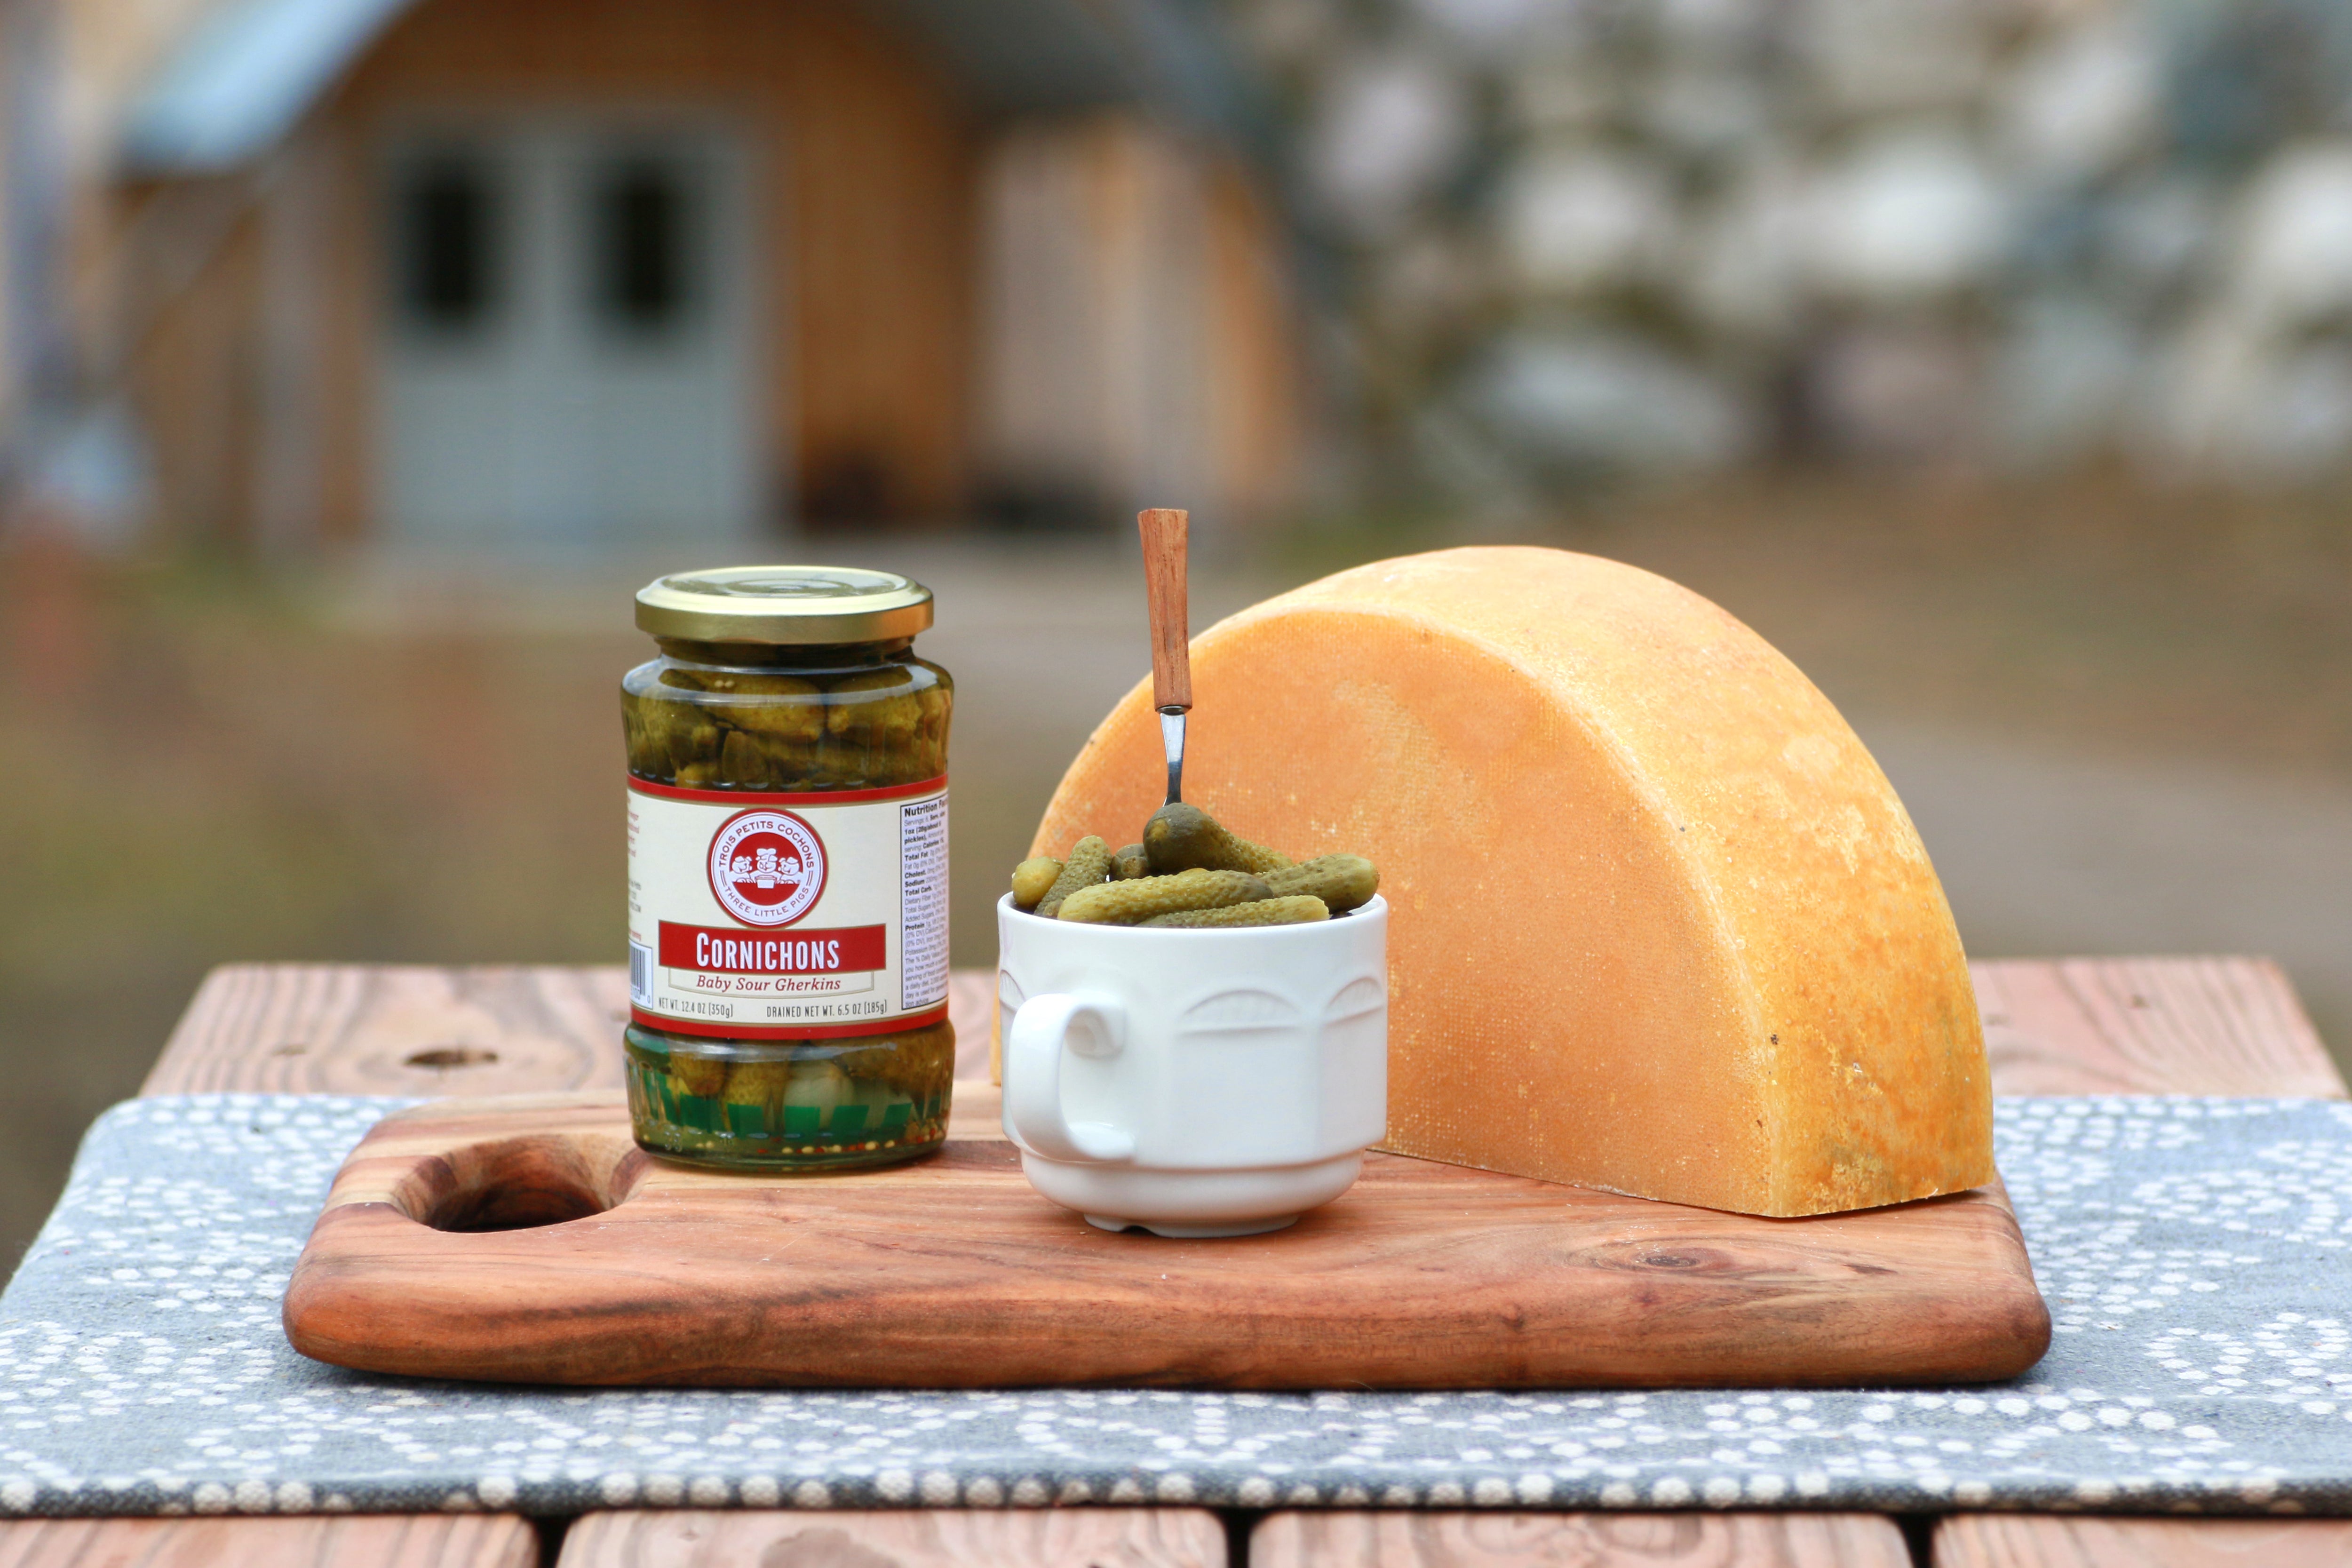 Have a Raclette Party with Our Cheese! - Conebella Farm